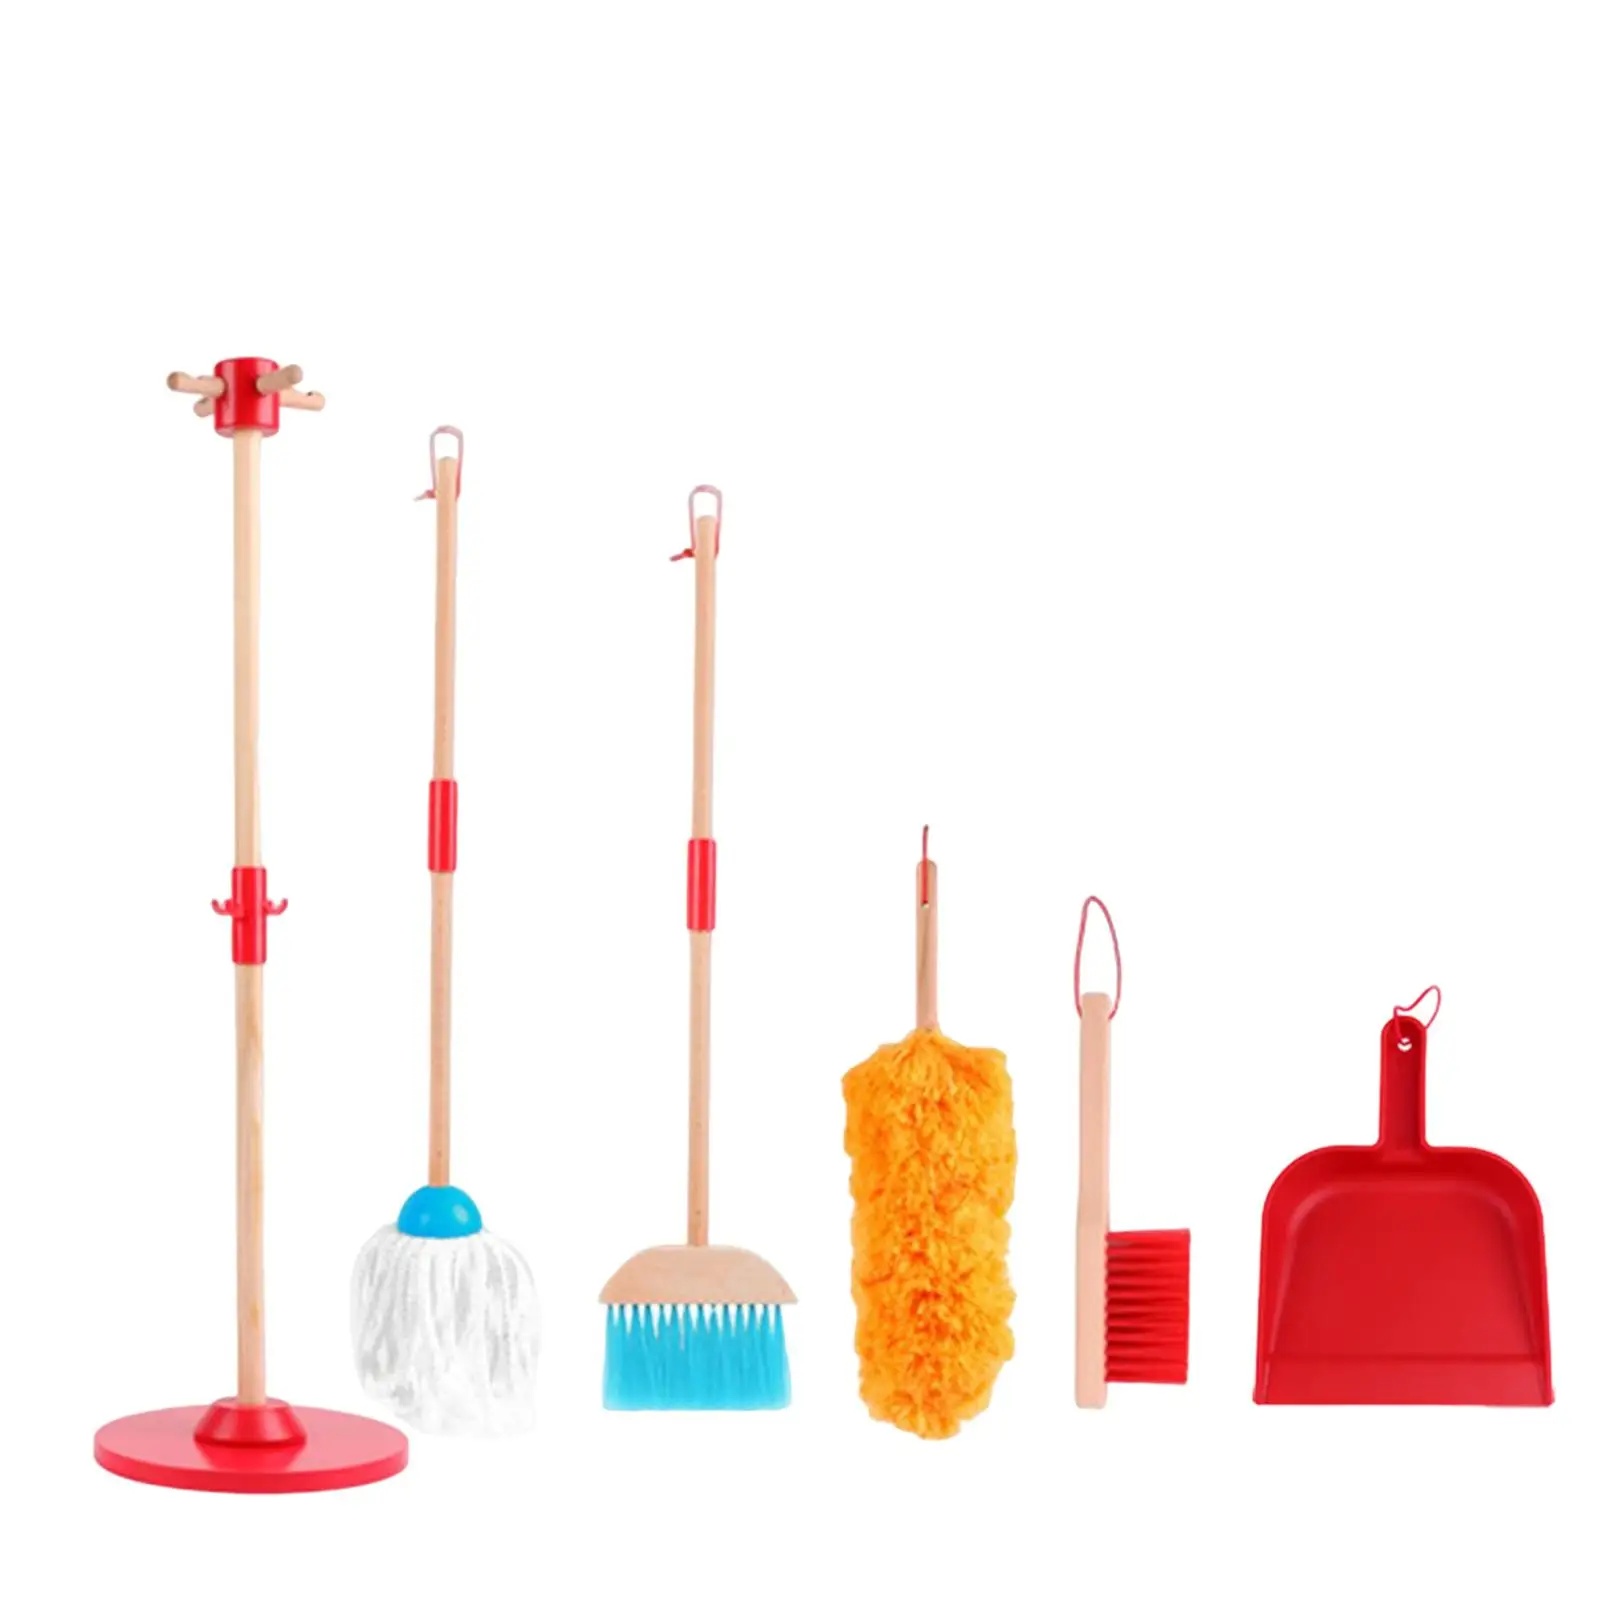 6Pcs Chidlren Housekeeping Cleaning Set Pretend Play Toy Accessory ,Designed for Children to Learn How to Do Housework